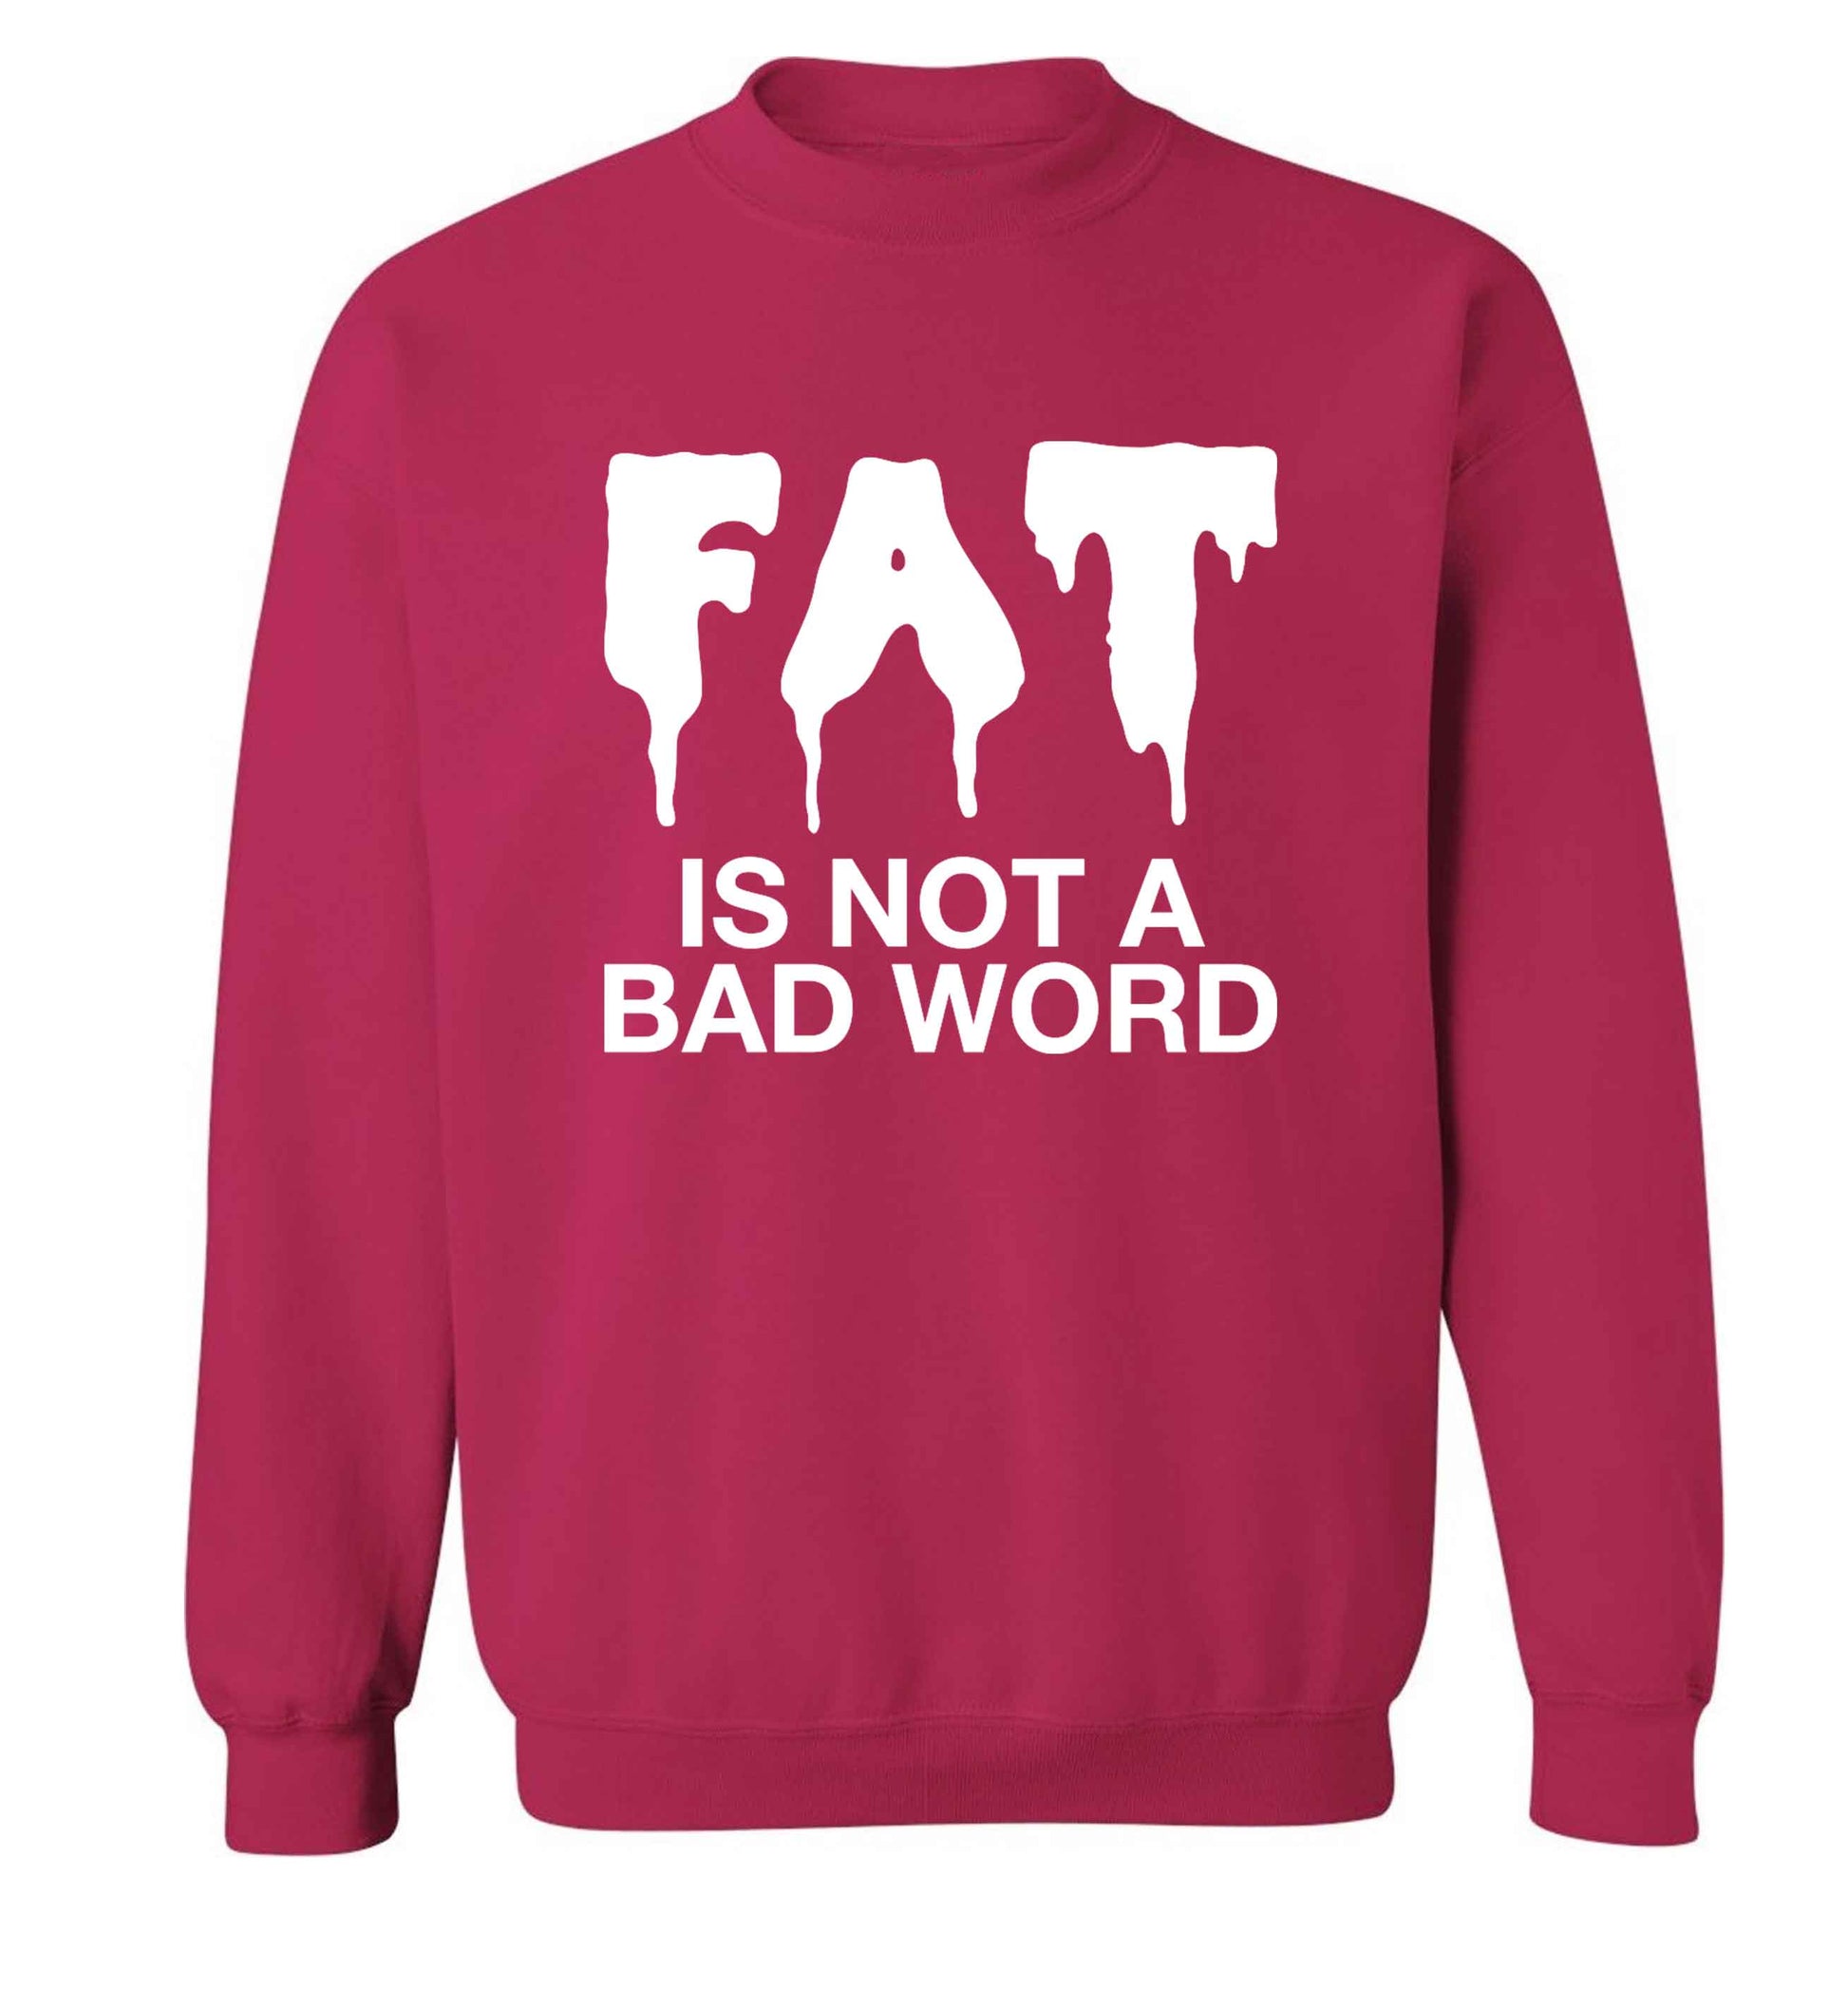 Fat is not a bad word adult's unisex pink sweater 2XL